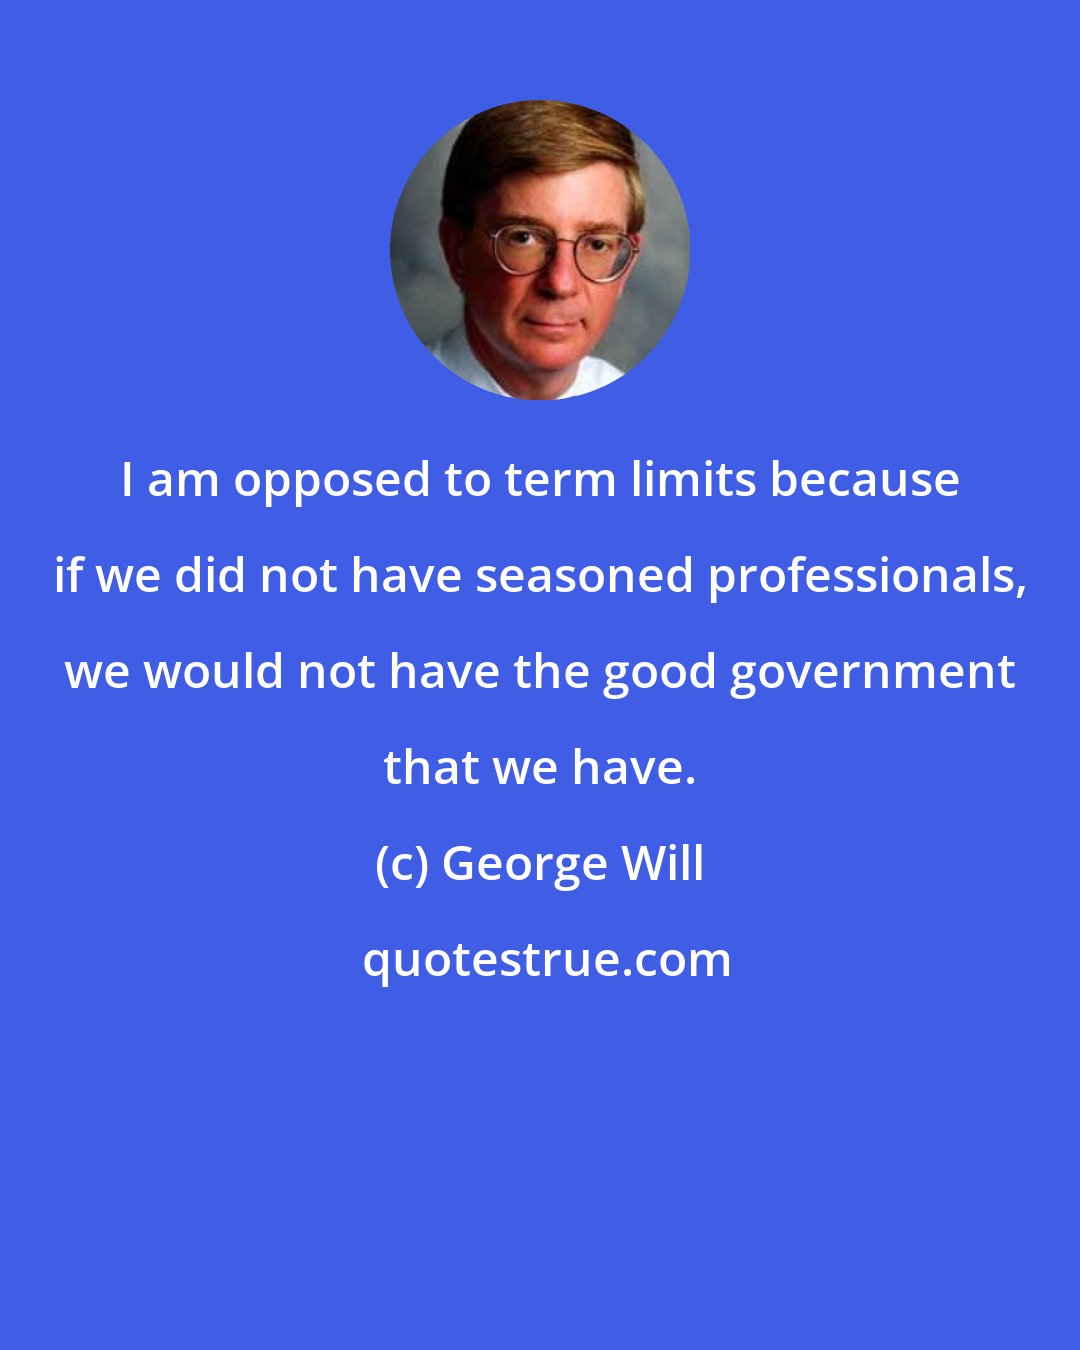 George Will: I am opposed to term limits because if we did not have seasoned professionals, we would not have the good government that we have.